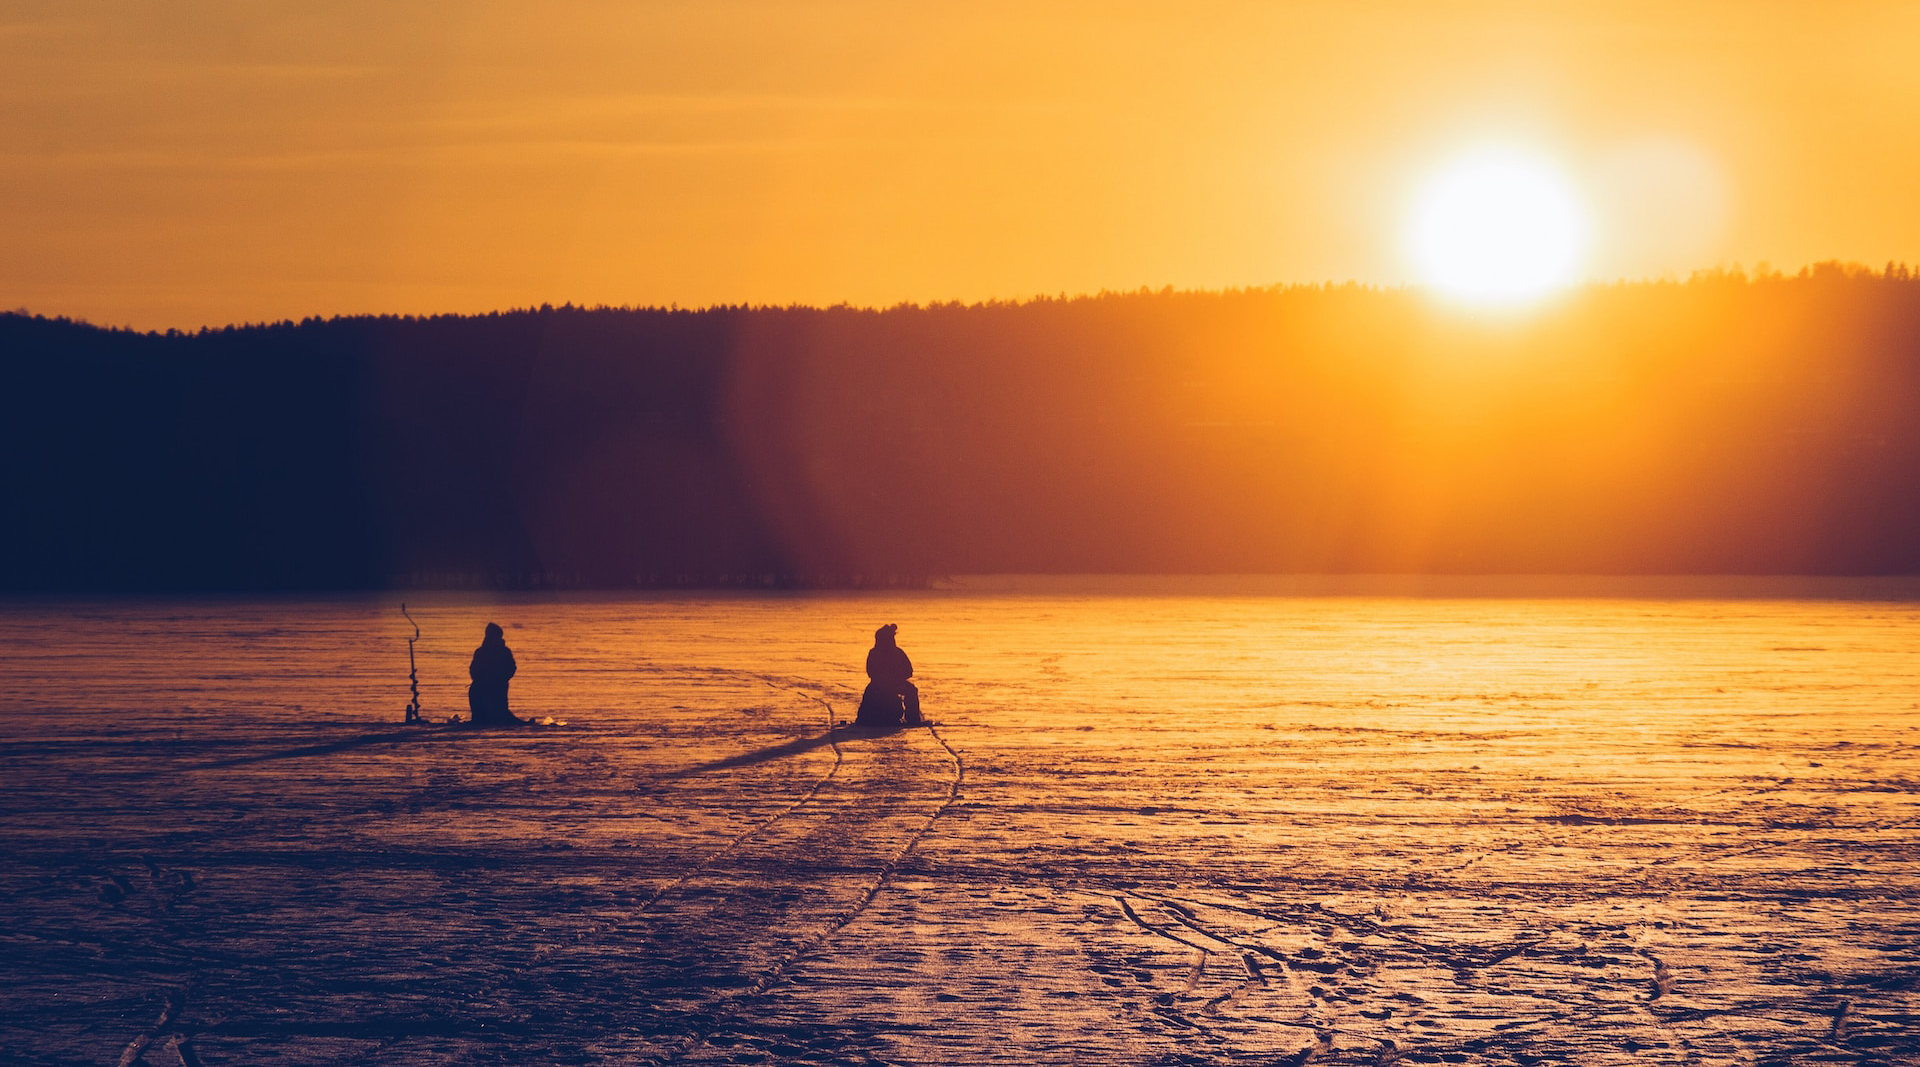 silhouette of two people ice fishing in the sunset